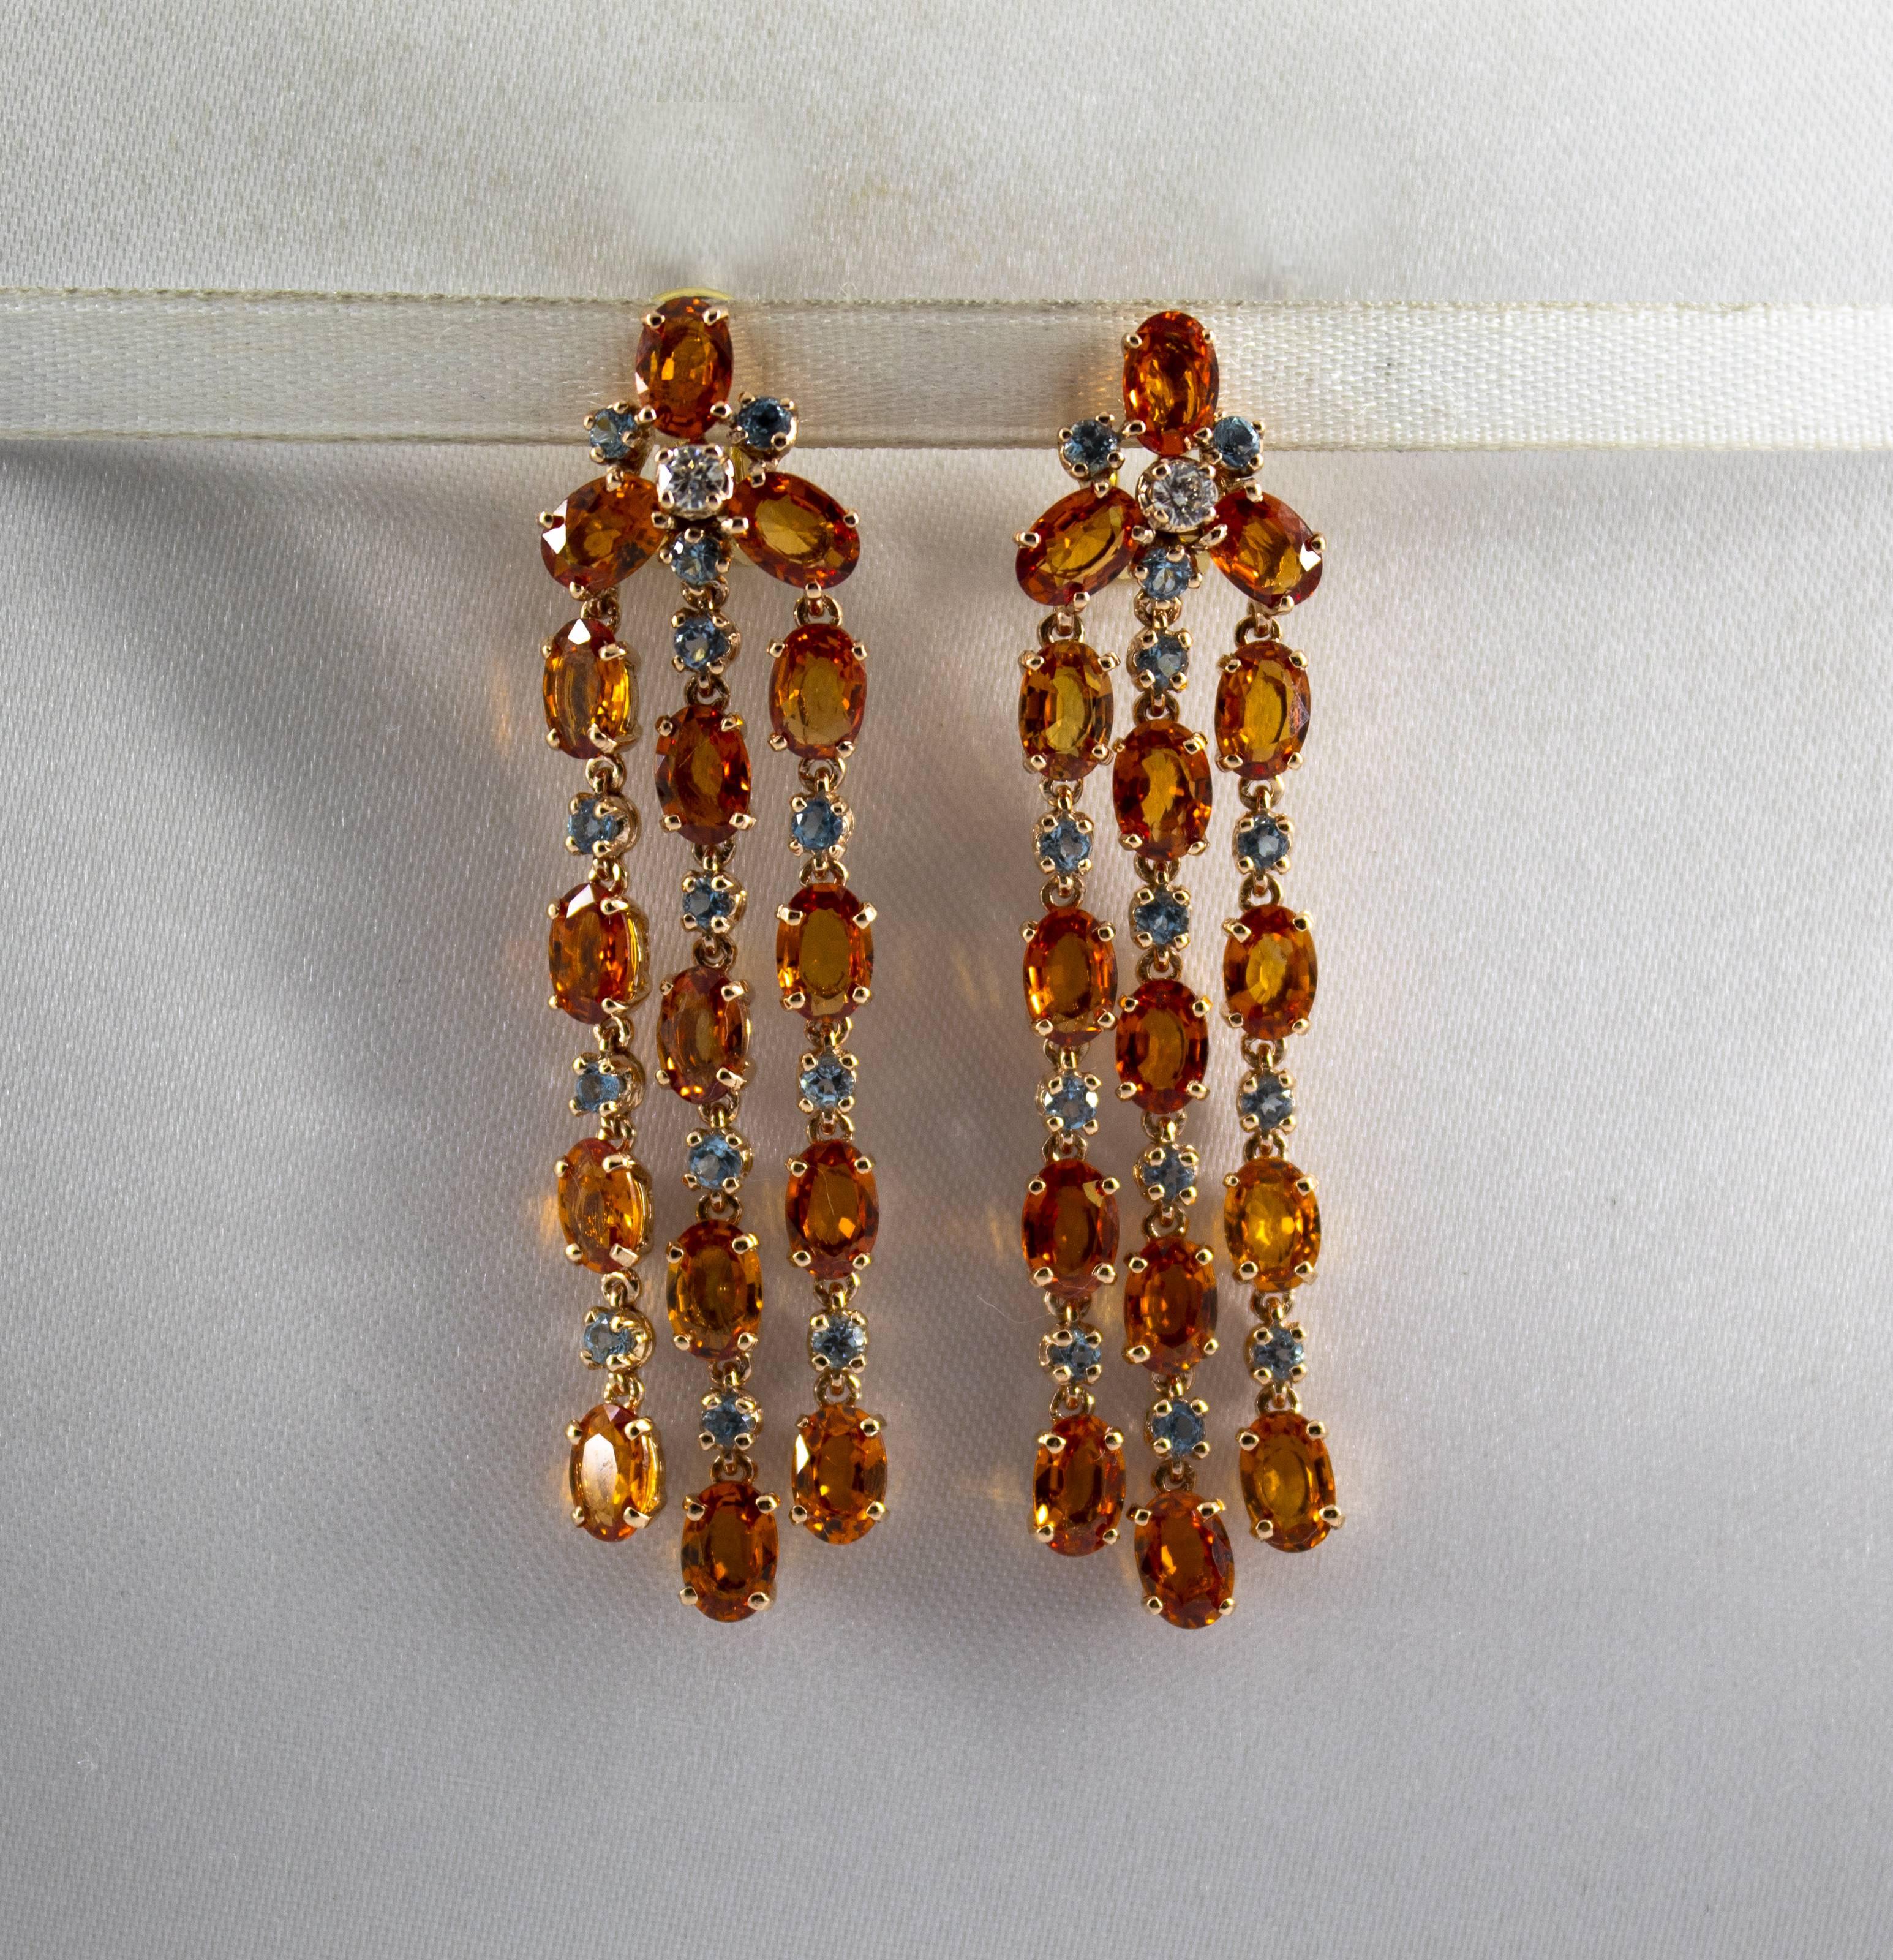 These Earrings are made of 14K Yellow Gold with 18K Yellow Gold Clips.
These Earrings have 0.14 Carats of White Diamonds.
These Earrings have 16.40 Carats of Yellow Sapphires.
These Earrings have also 1.10 Carats of Blue Topaz.
All our Earrings have